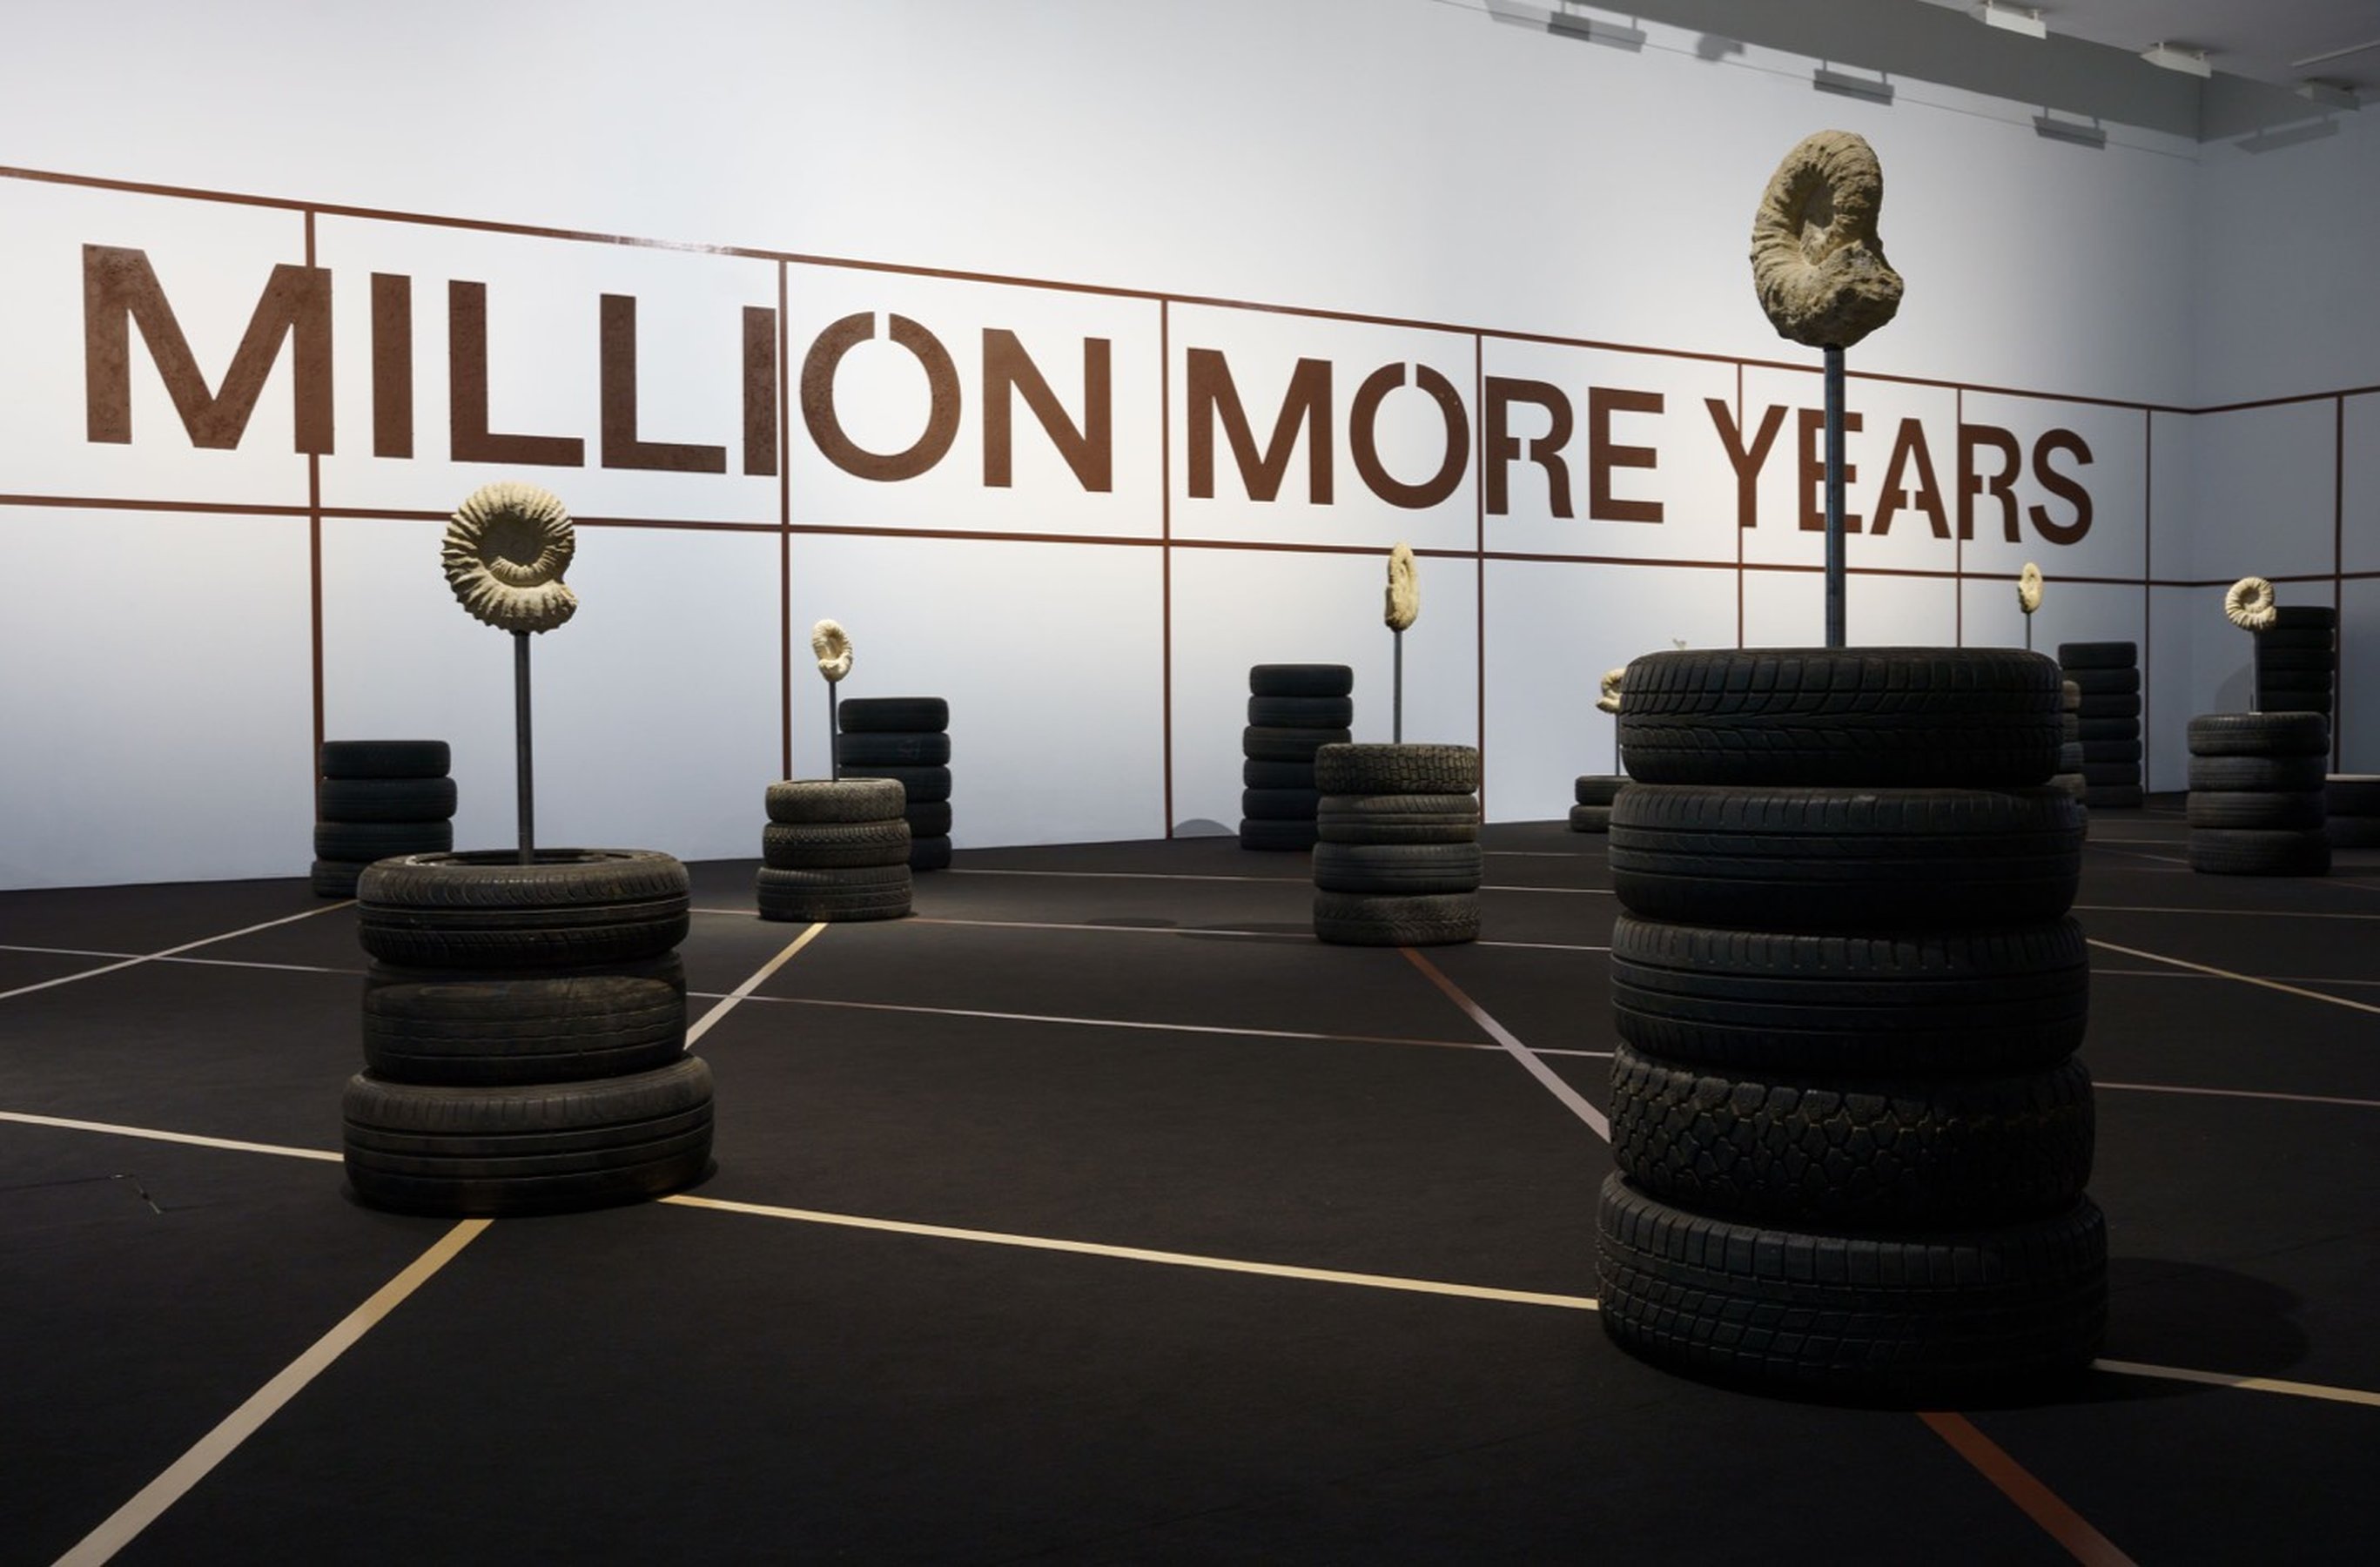 Jonas Staal WE DEMAND A MILLION MORE YEARS (medium sculpture), 2022 ​​​​​​​Ammonite fossils of approximately 100 million years old, metal rods, hardened oil, 3 defunct car tires